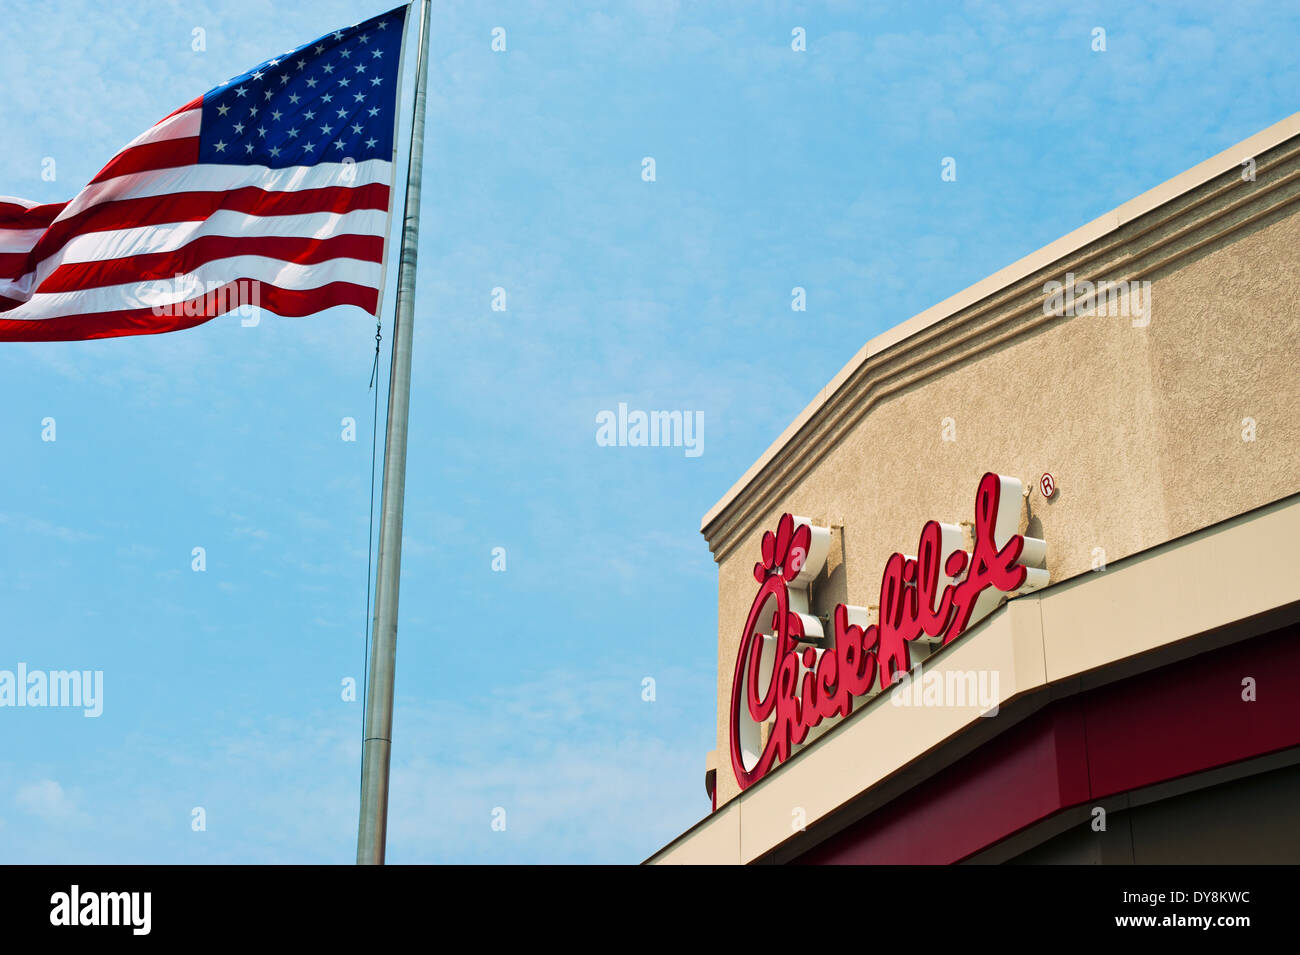 Chick-fil -a,  Chick Fil A restaurant sign with American flag Stock Photo